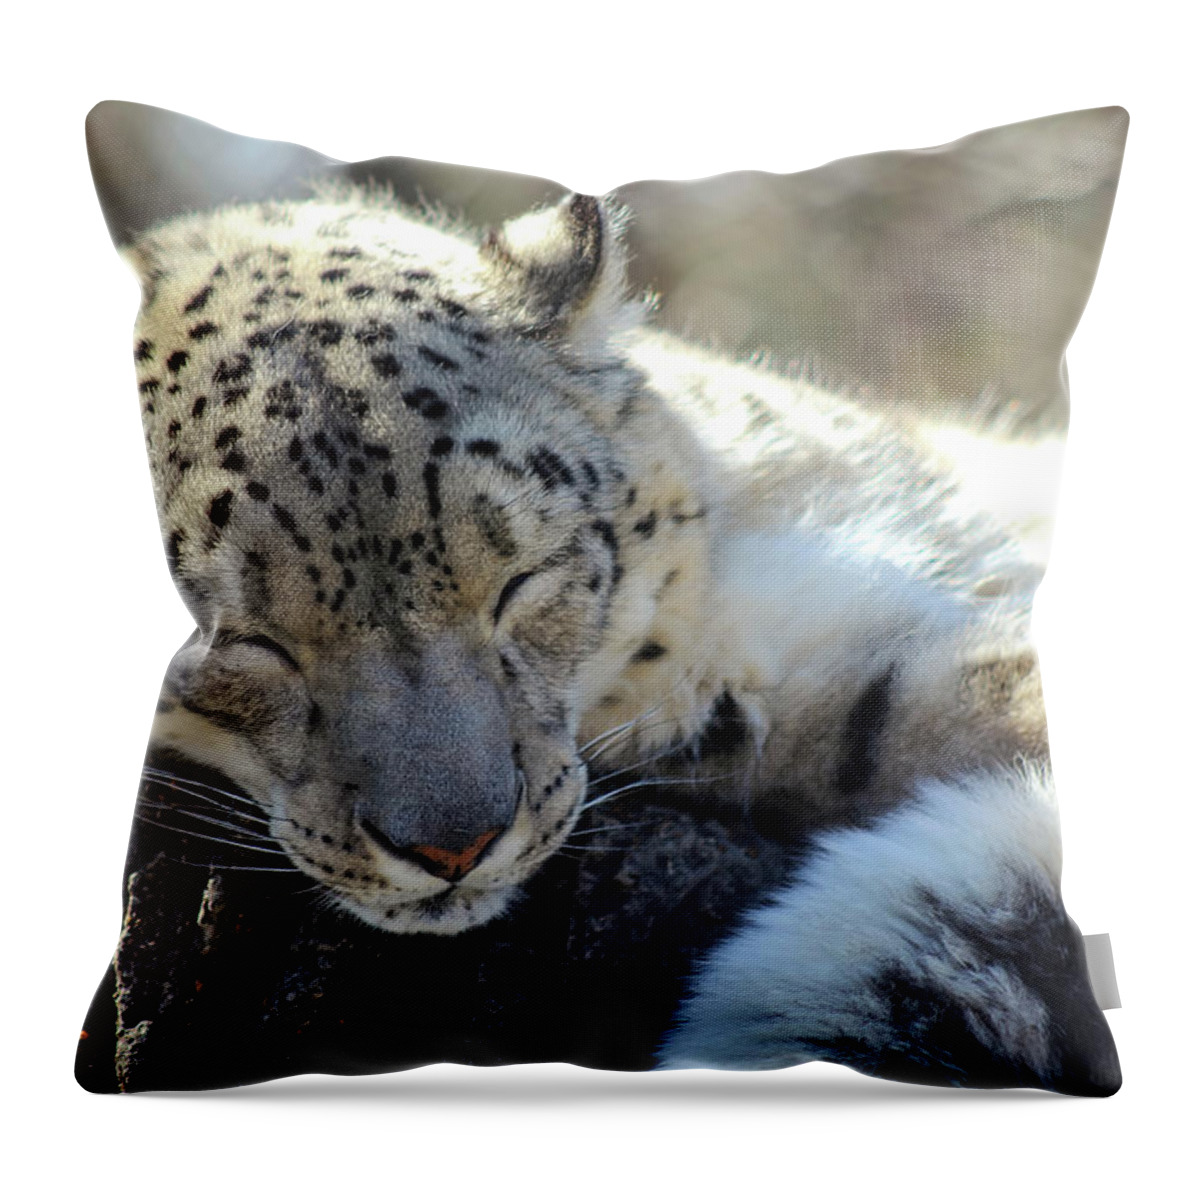 Snow Leopard Throw Pillow featuring the photograph Sleeping Snow Leopard by Holly Ross